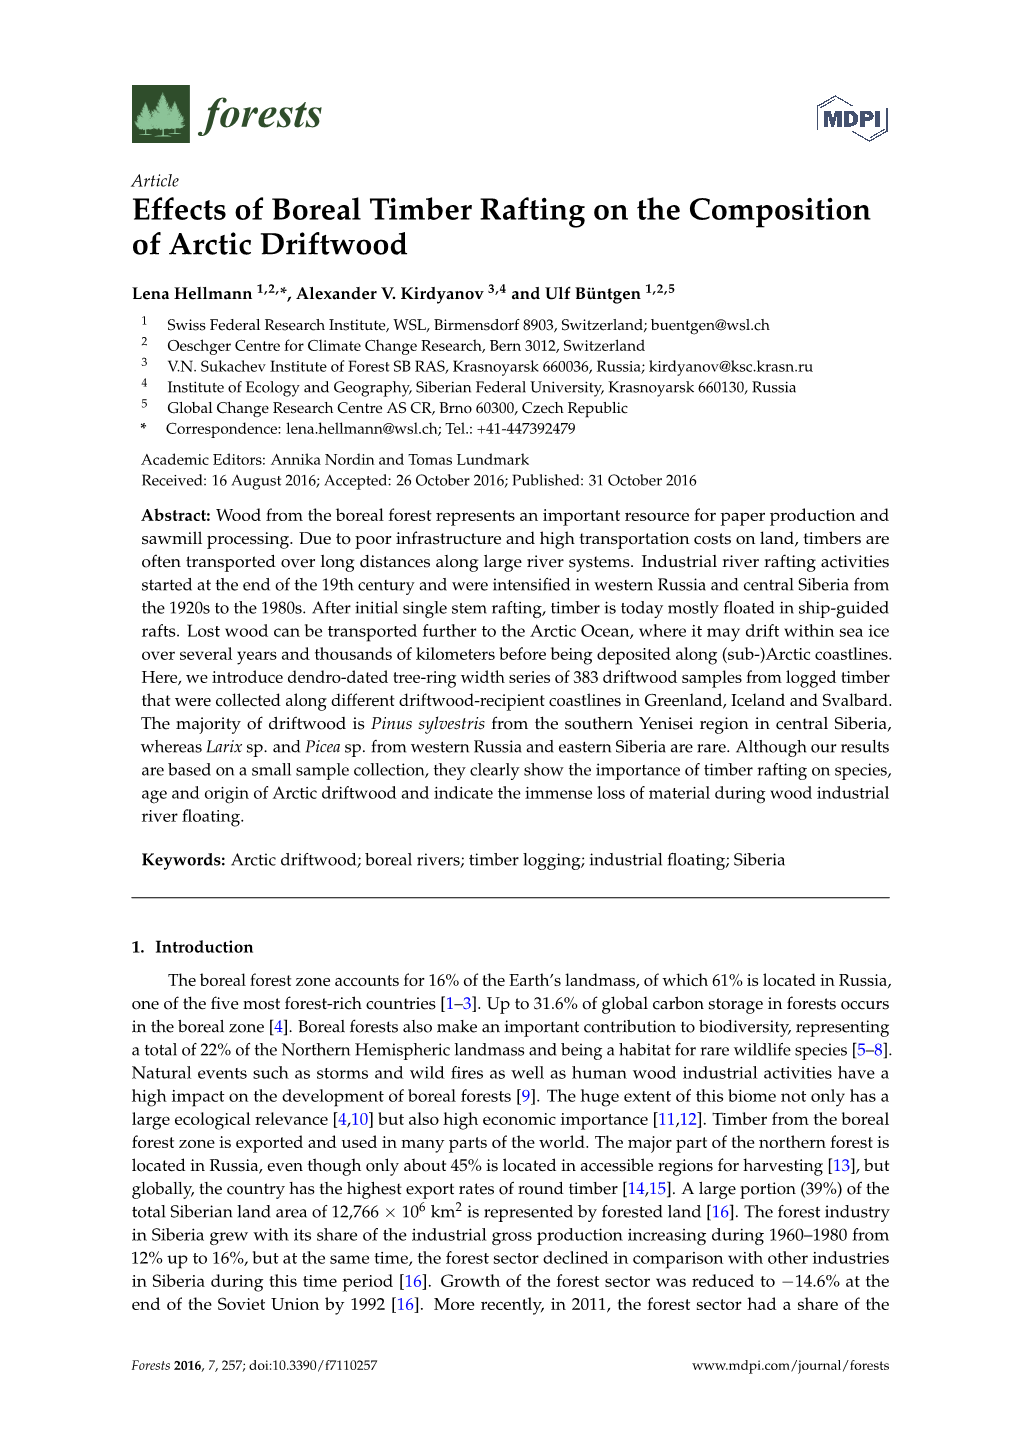 Effects of Boreal Timber Rafting on the Composition of Arctic Driftwood